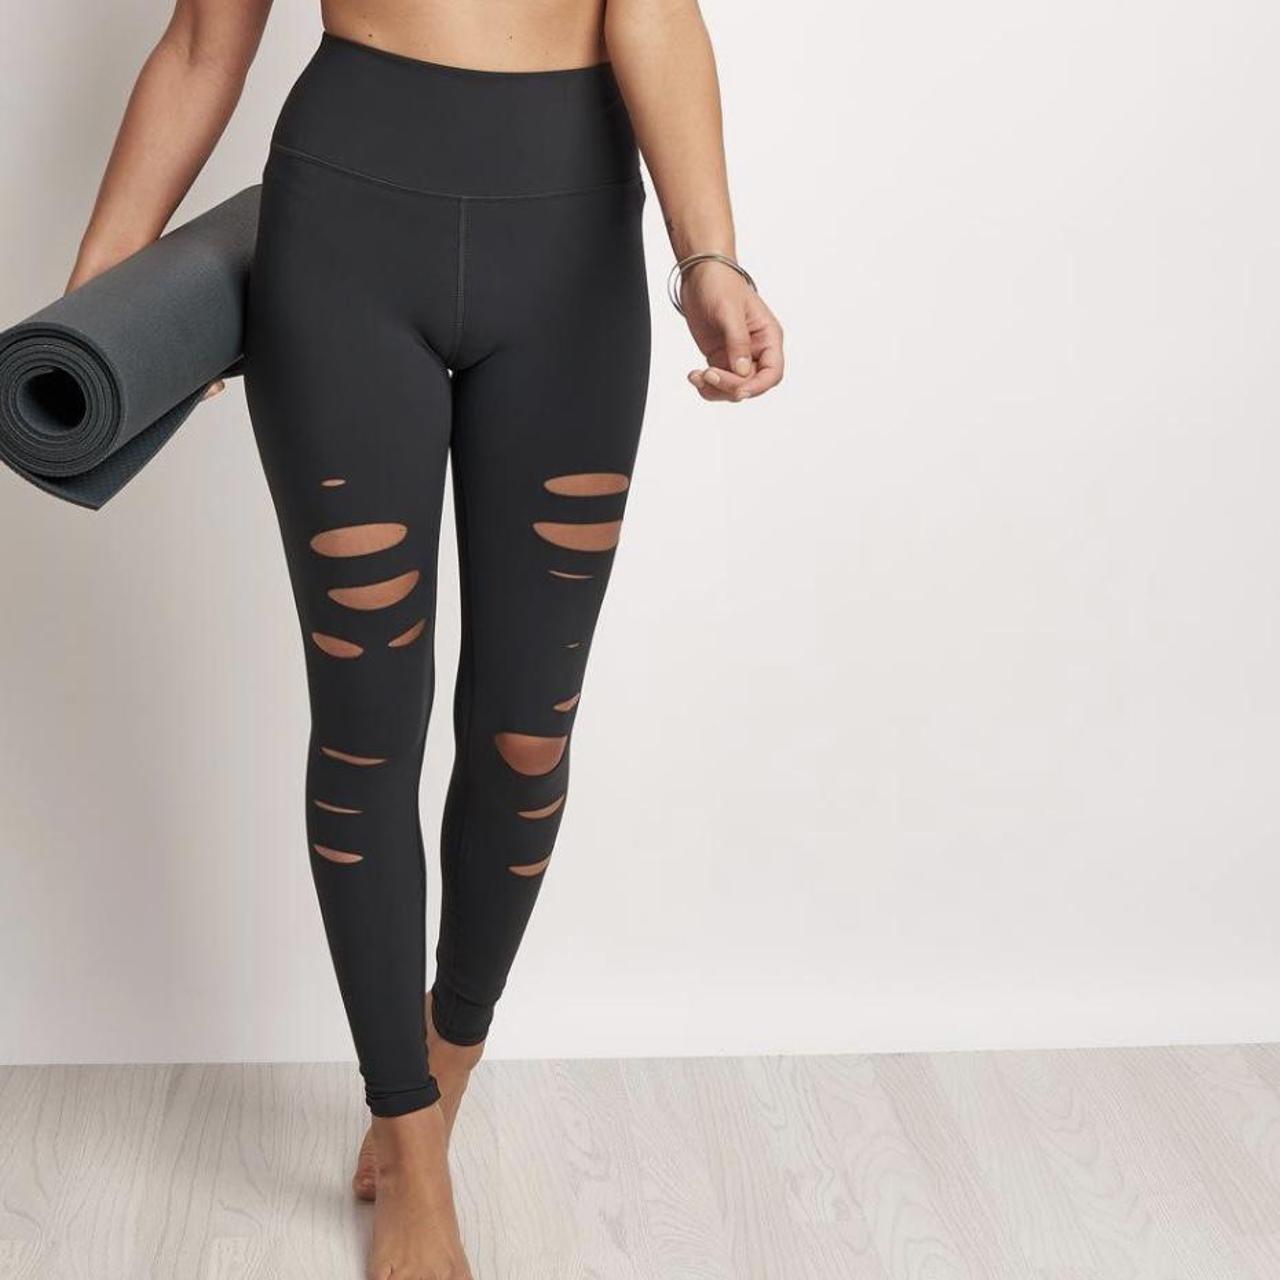 Alo yoga ripped warrior legging One rip on right - Depop